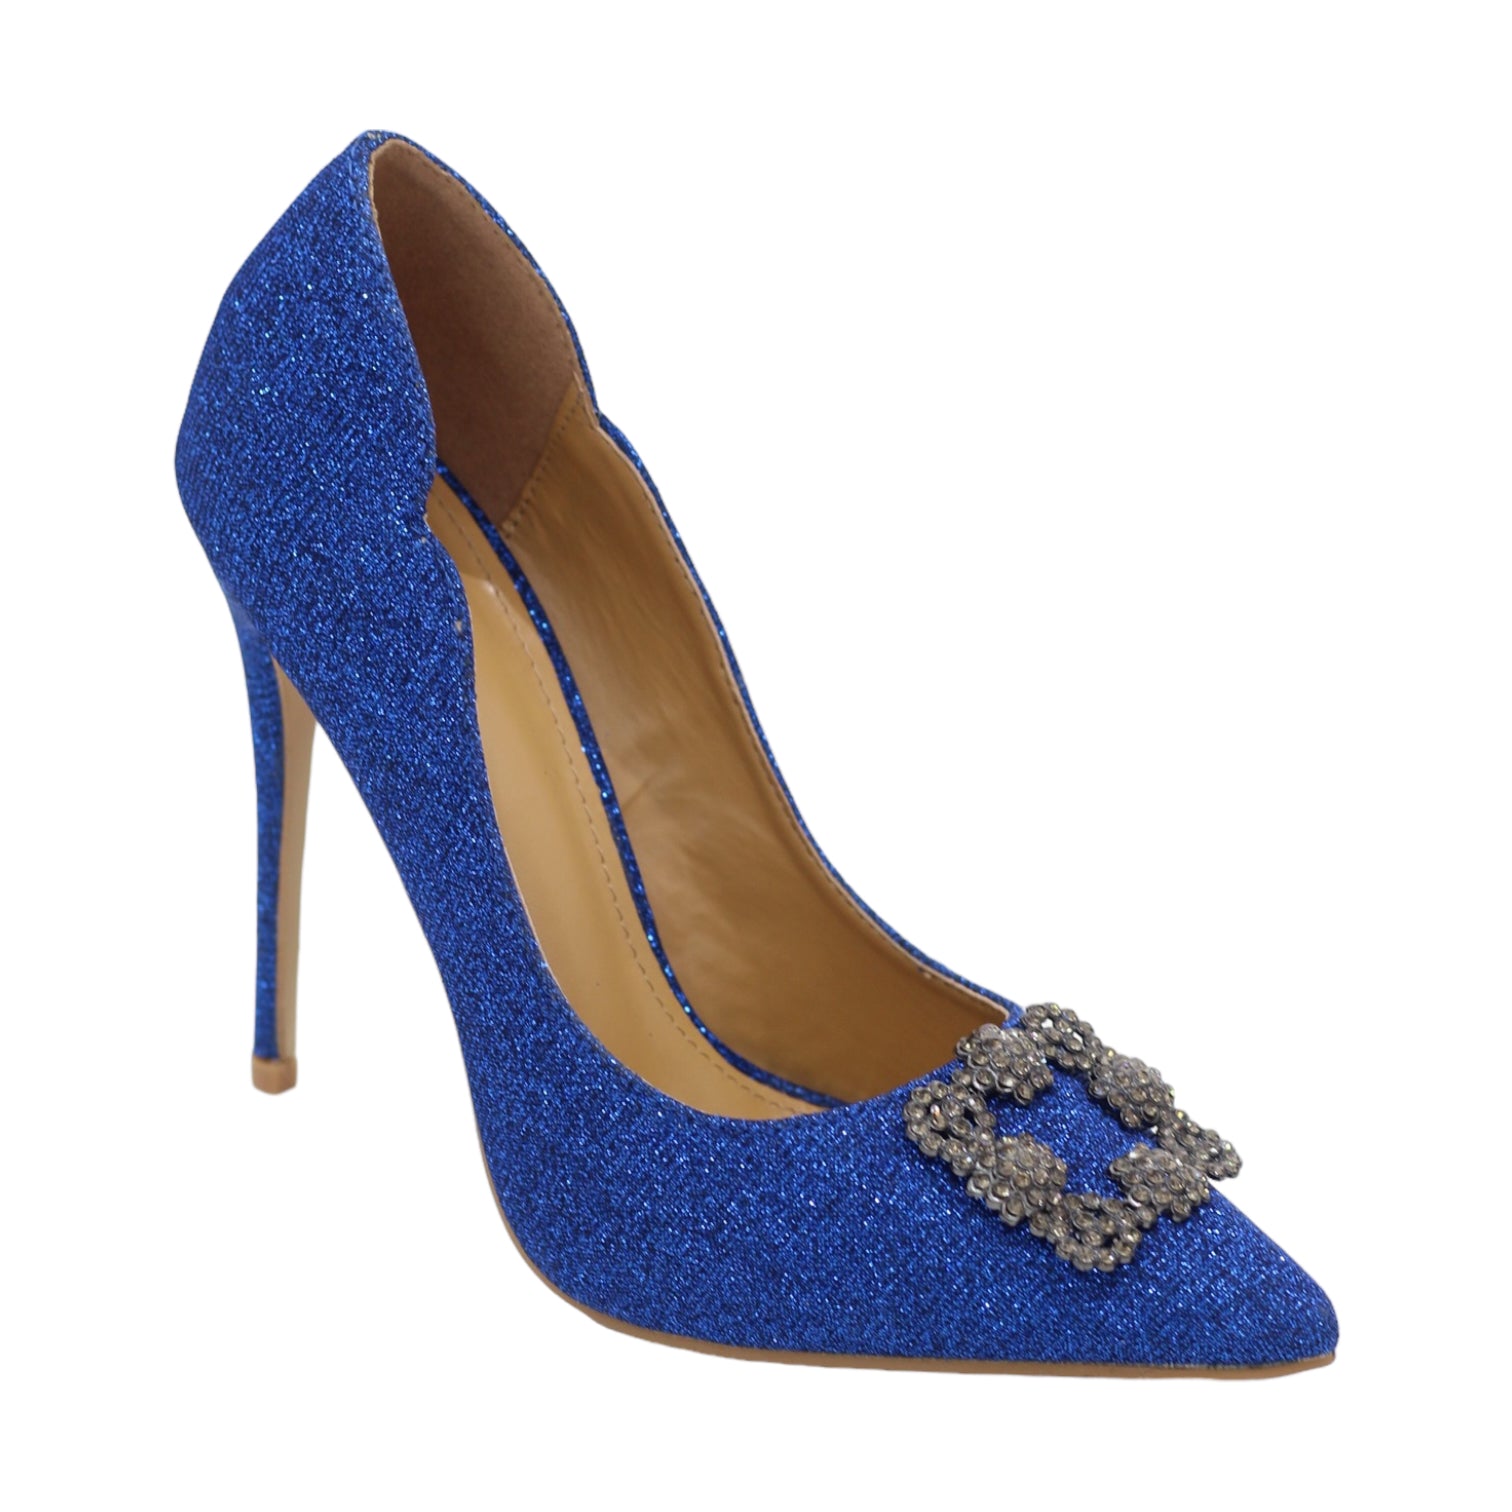 Kate Middleton Wears Her Favorite Gianvito Rossi Suede Pumps in Blue for  Children's Hospital Opening